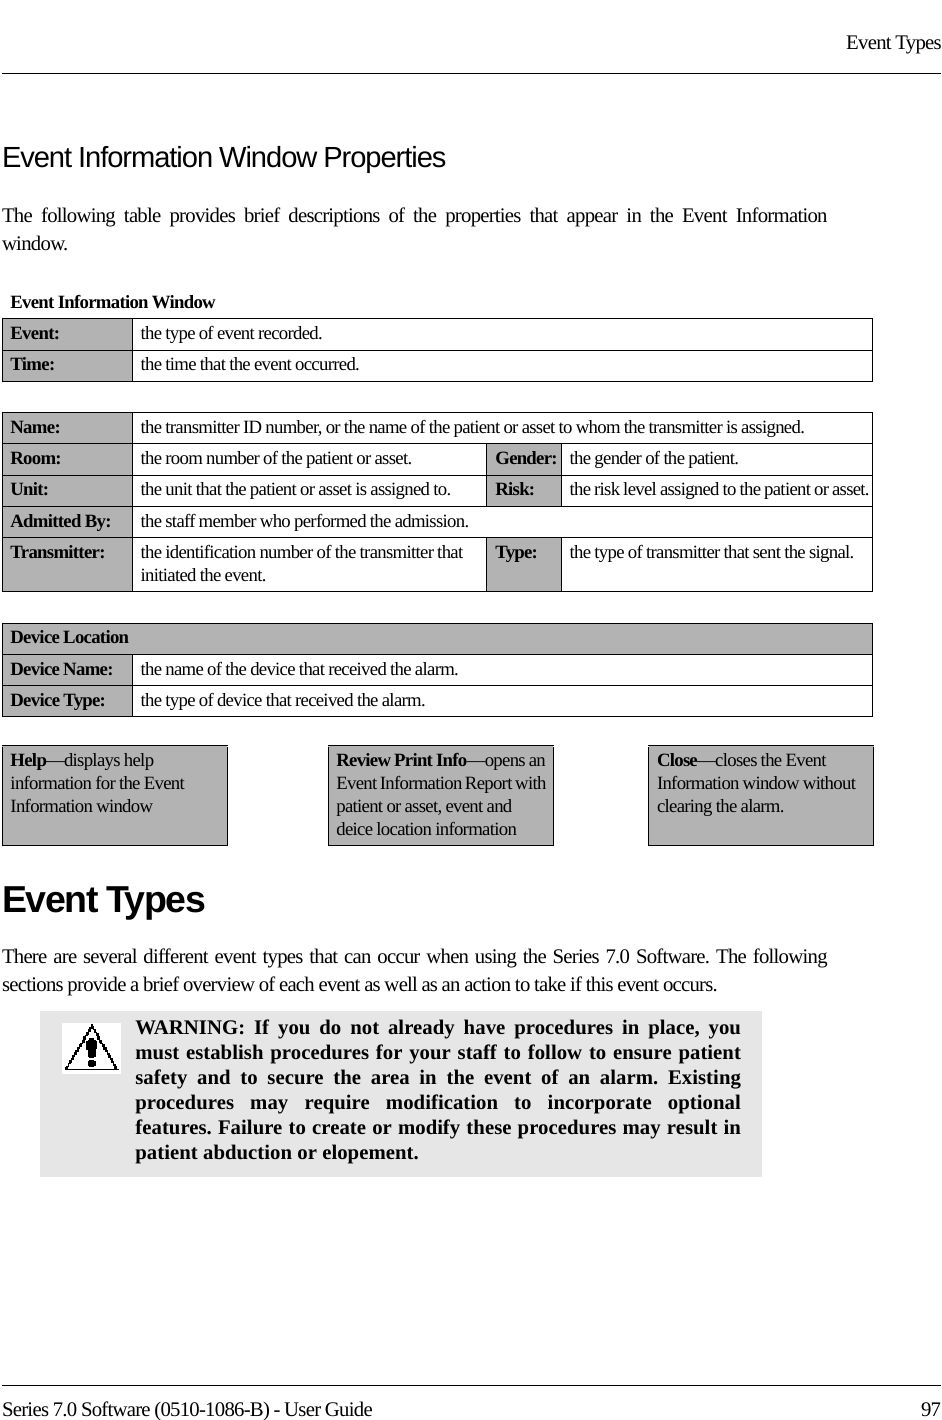 Series 7.0 Software (0510-1086-B) - User Guide  97Event TypesEvent Information Window PropertiesThe following table provides brief descriptions of the properties that appear in the Event Information window.Event TypesThere are several different event types that can occur when using the Series 7.0 Software. The following sections provide a brief overview of each event as well as an action to take if this event occurs.Event Information WindowEvent:  the type of event recorded. Time: the time that the event occurred.Name: the transmitter ID number, or the name of the patient or asset to whom the transmitter is assigned.Room: the room number of the patient or asset. Gender: the gender of the patient.Unit: the unit that the patient or asset is assigned to. Risk: the risk level assigned to the patient or asset.Admitted By: the staff member who performed the admission.Transmitter: the identification number of the transmitter that initiated the event. Type: the type of transmitter that sent the signal.Device LocationDevice Name: the name of the device that received the alarm.Device Type: the type of device that received the alarm.Help—displays help information for the Event Information windowReview Print Info—opens an Event Information Report with patient or asset, event and deice location informationClose—closes the Event Information window without clearing the alarm.WARNING: If you do not already have procedures in place, you must establish procedures for your staff to follow to ensure patient safety and to secure the area in the event of an alarm. Existing procedures may require modification to incorporate optional features. Failure to create or modify these procedures may result in patient abduction or elopement. 